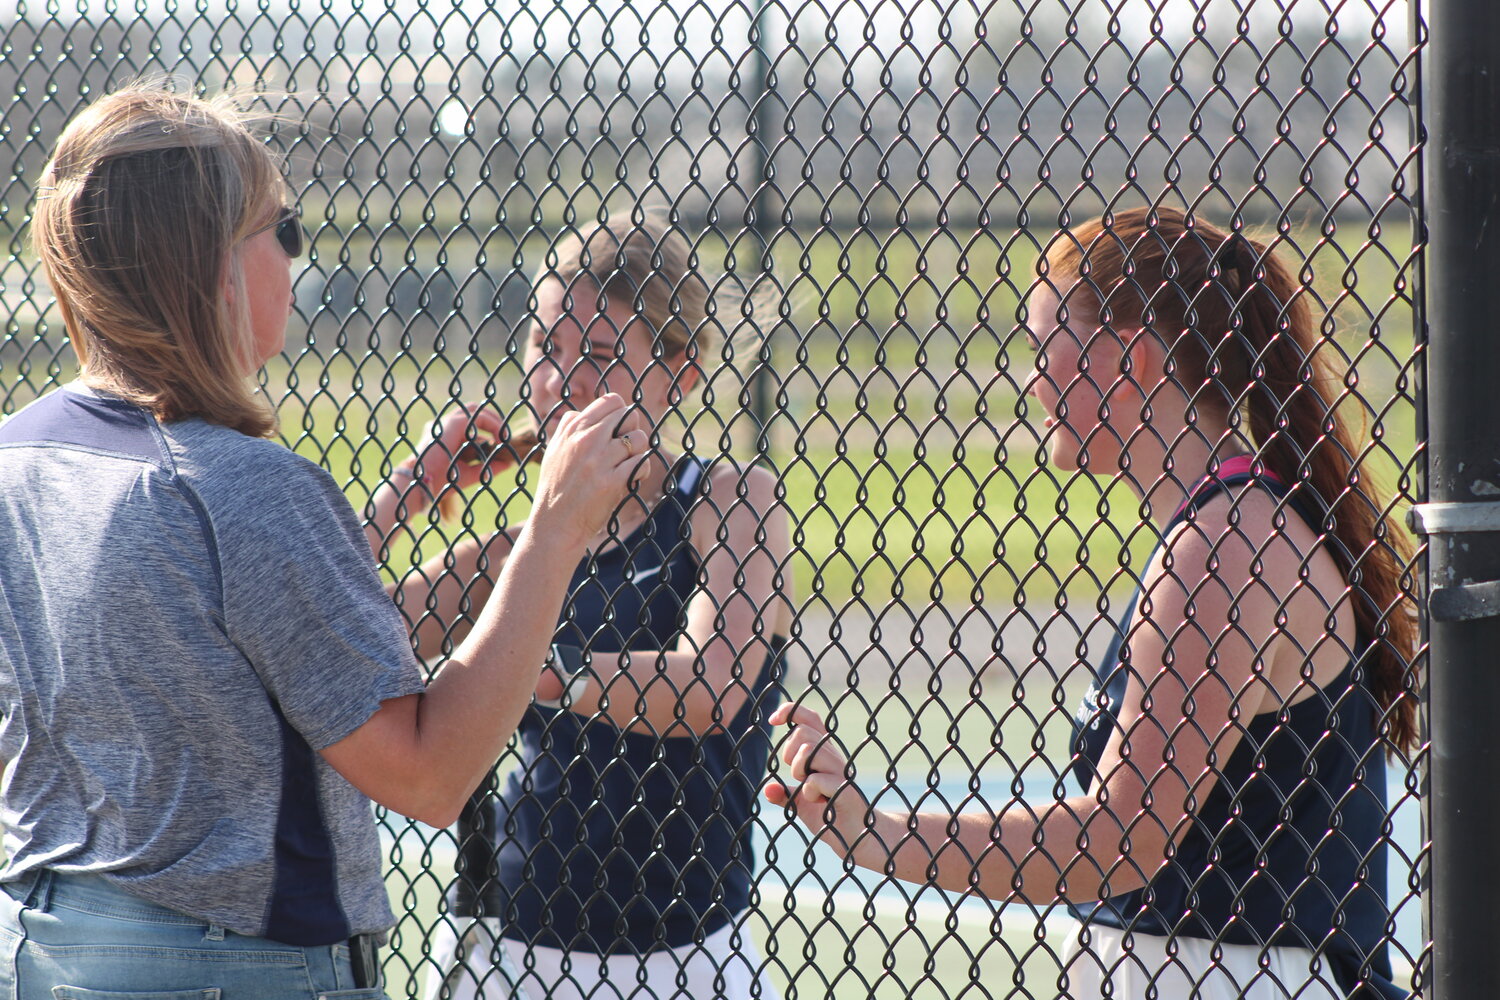 Charger coach Lori Guard speaks with her 2 doubles team during a break in the action.